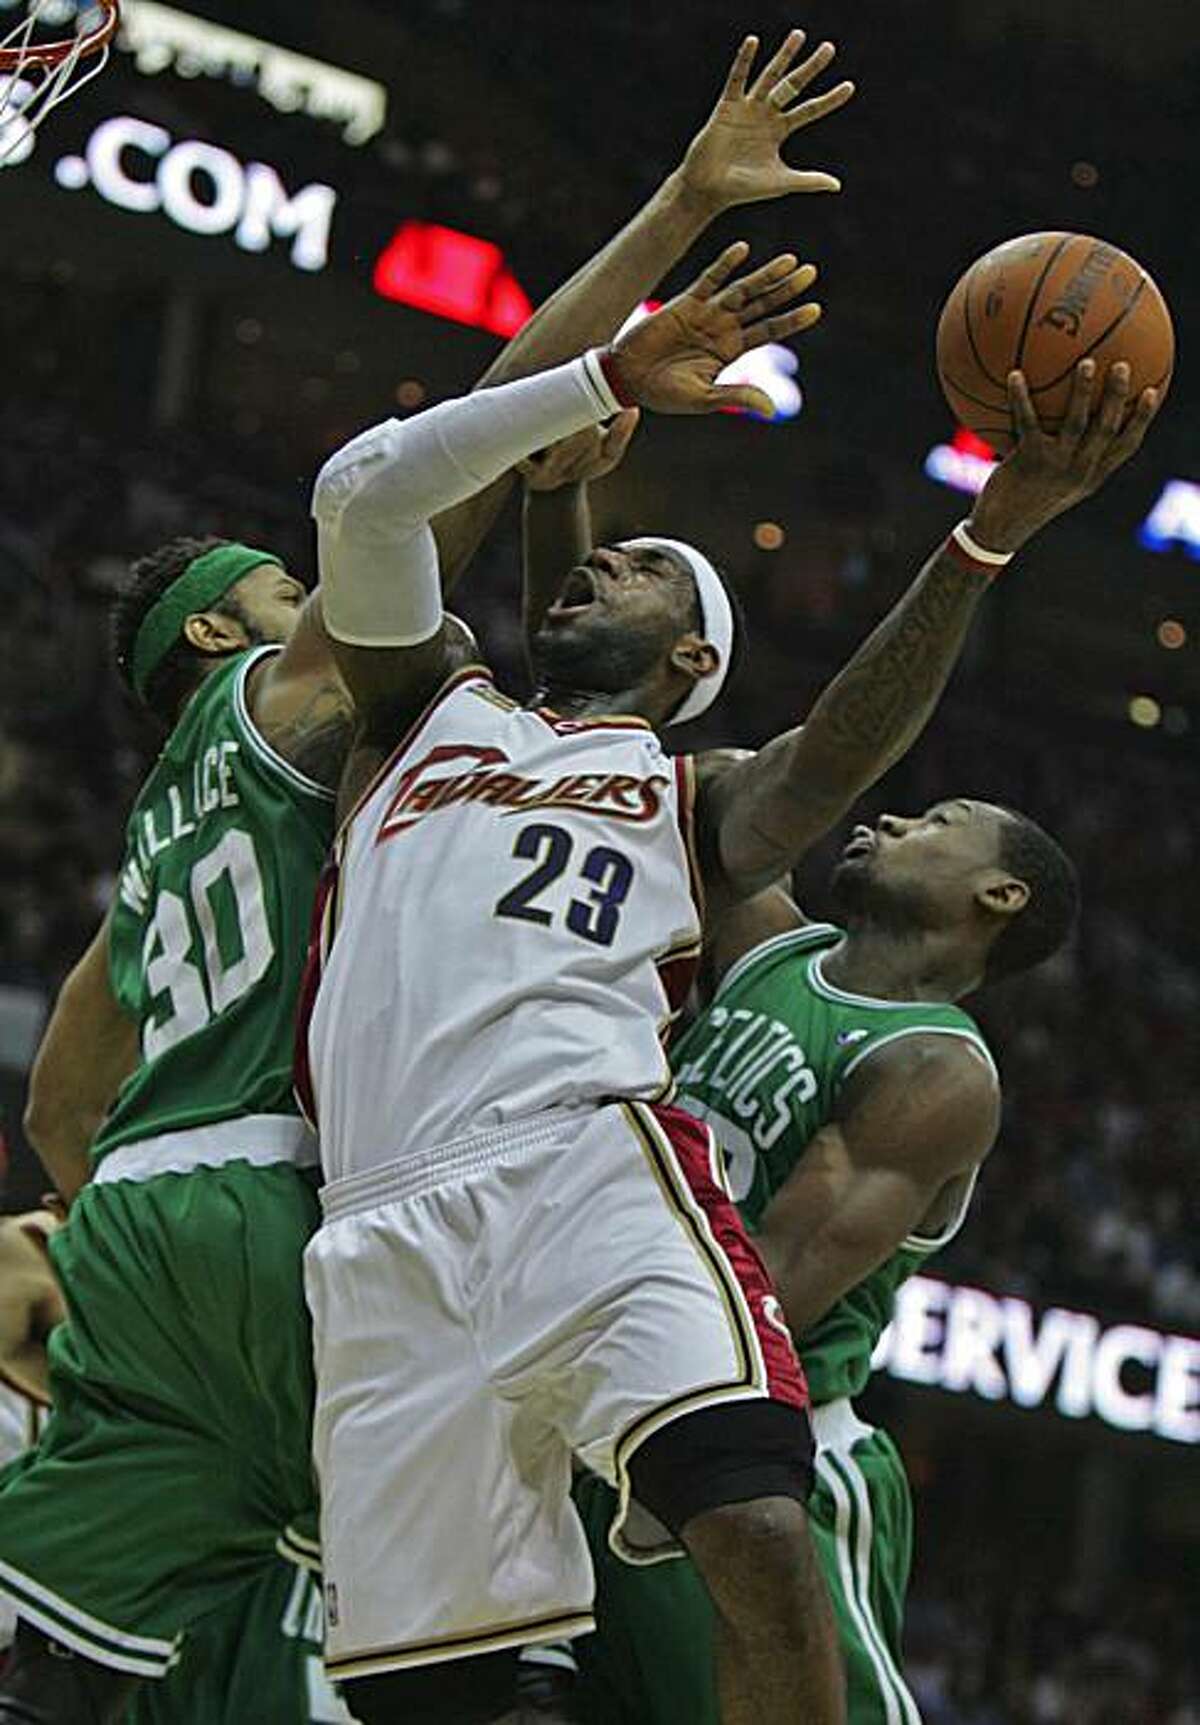 Cleveland Cavaliers' LeBron James (23) drives to the basket between Boston Celtics' Rasheed Wallace (30) and Tony Allen during first-half action in the opening game of their second-round NBA Eastern Conference playoff series at Quicken Loans Arena in Cleveland, Ohio, on Saturday, May 1, 2010. (Ed Suba Jr./Akron Beacon Journal/MCT)